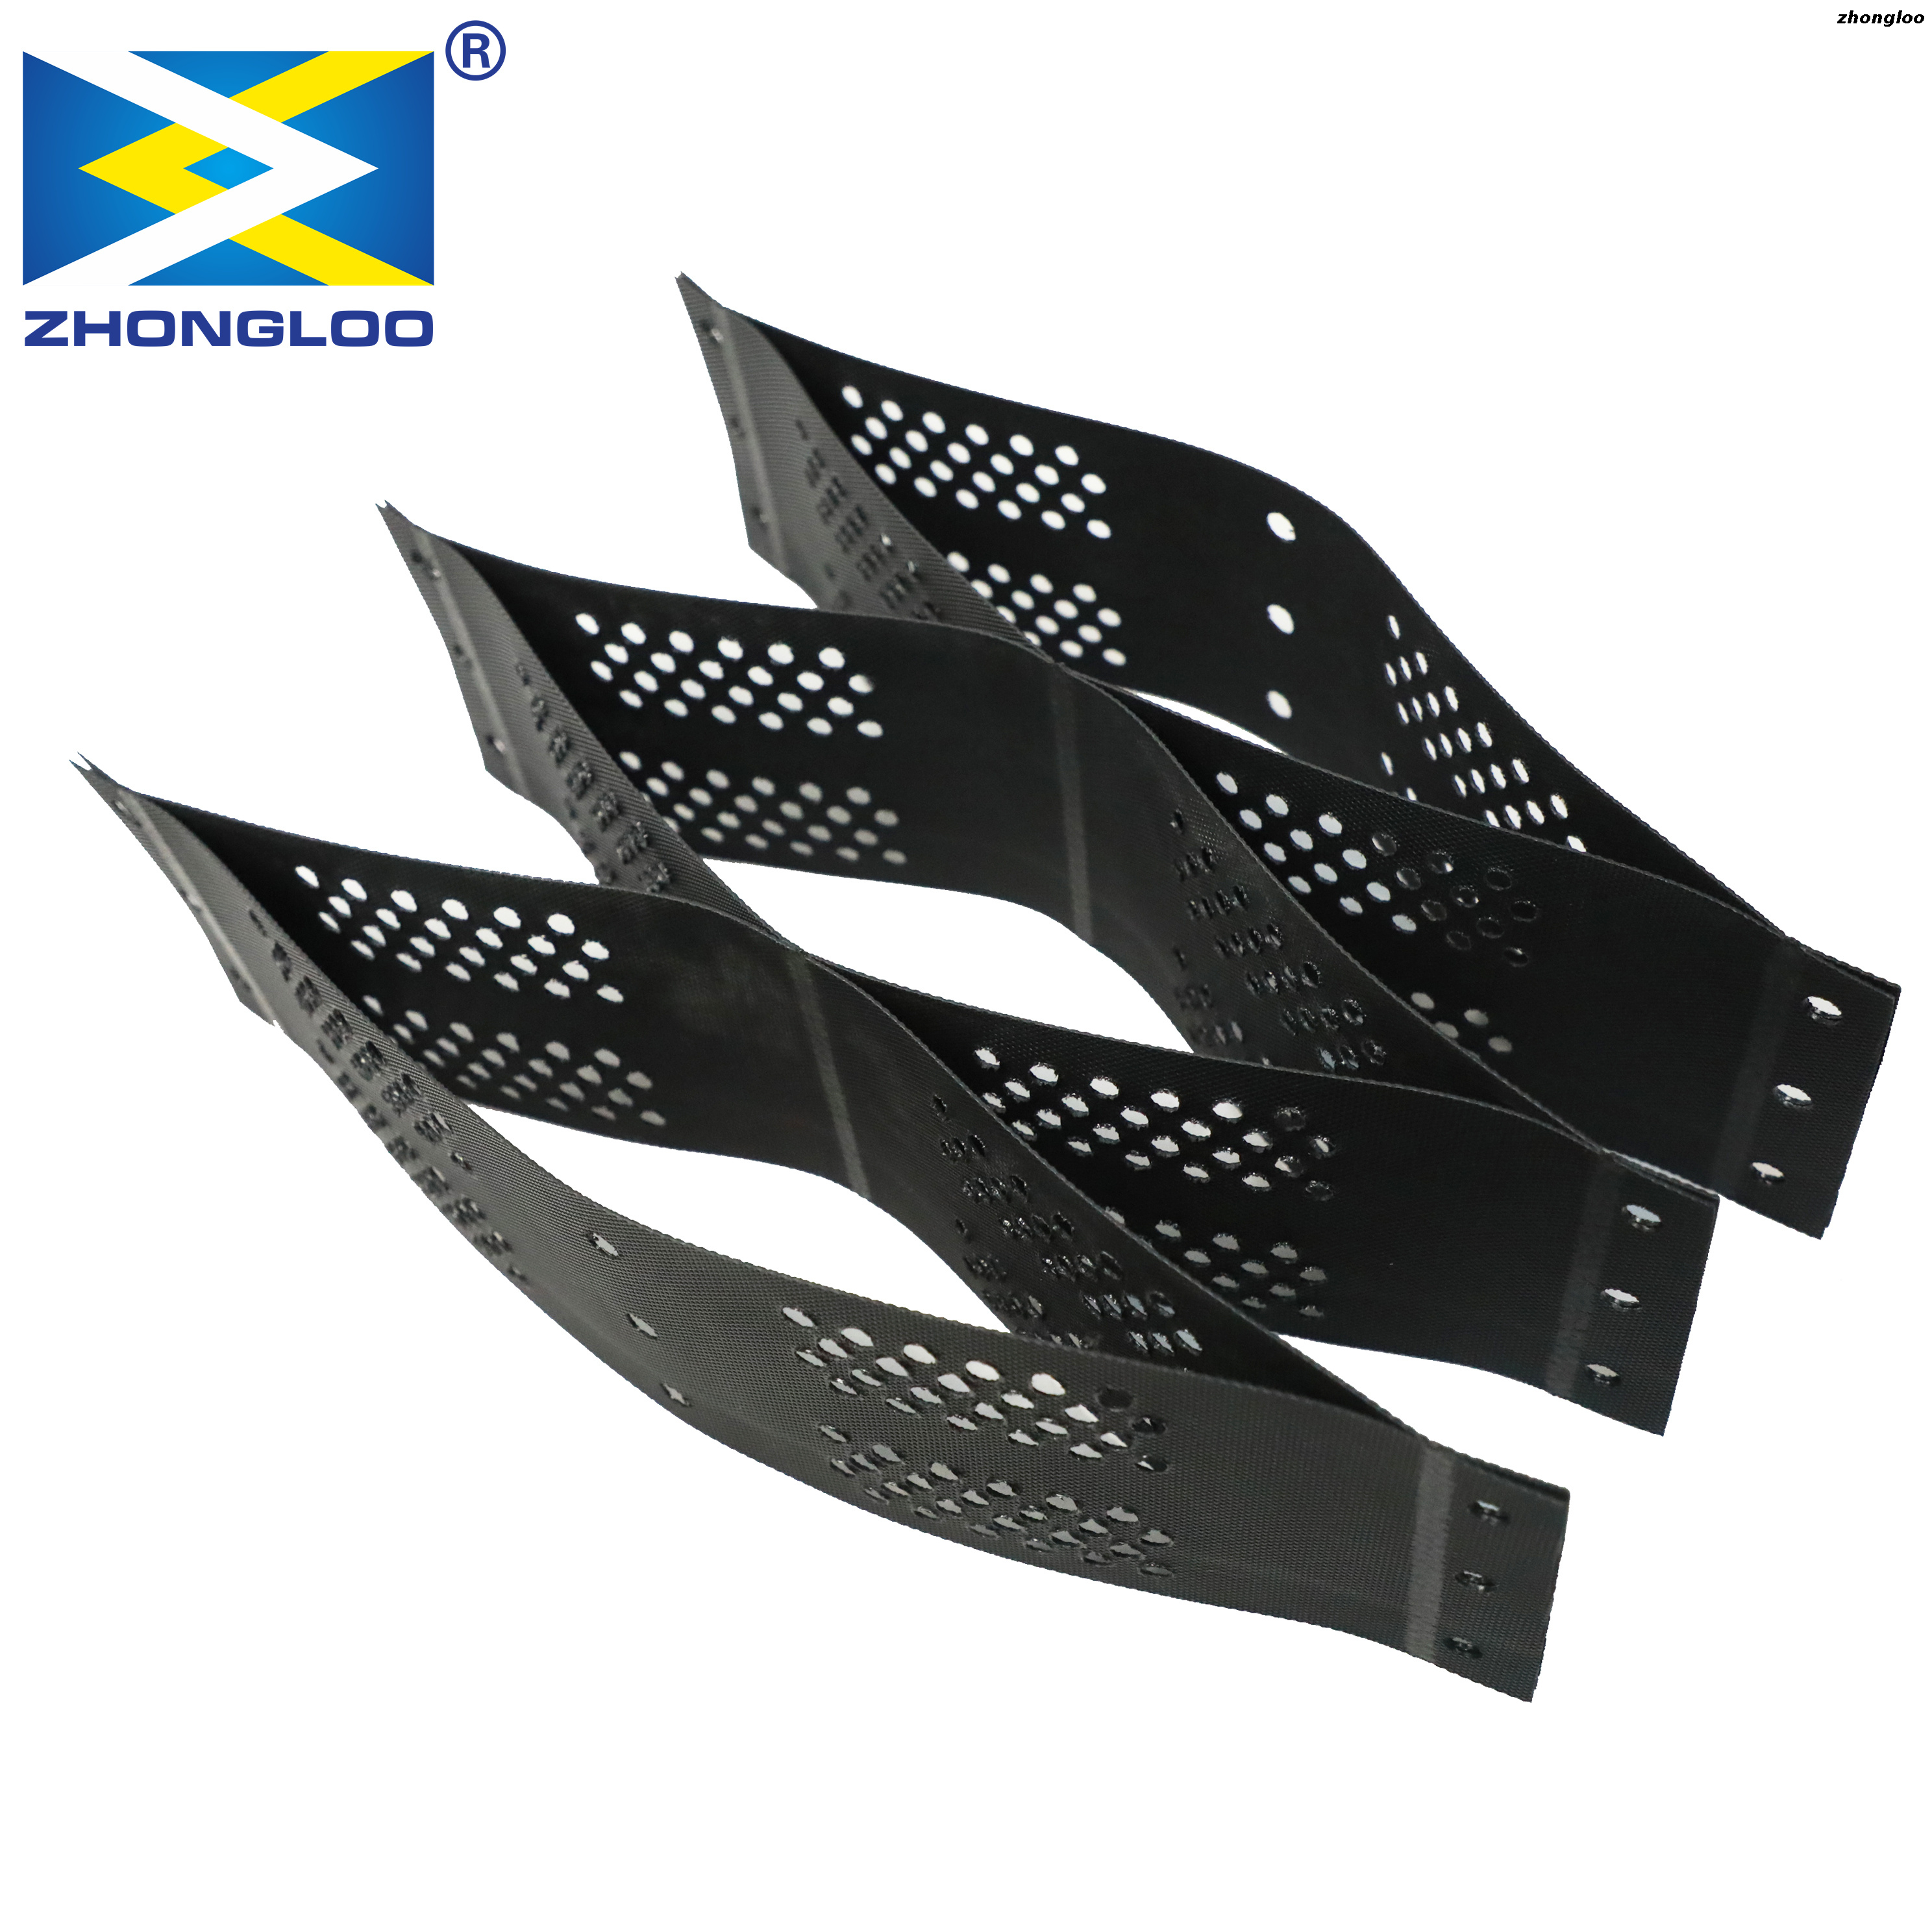 ASTM Standard HDPE Textured/Perforated Geocells for Slope